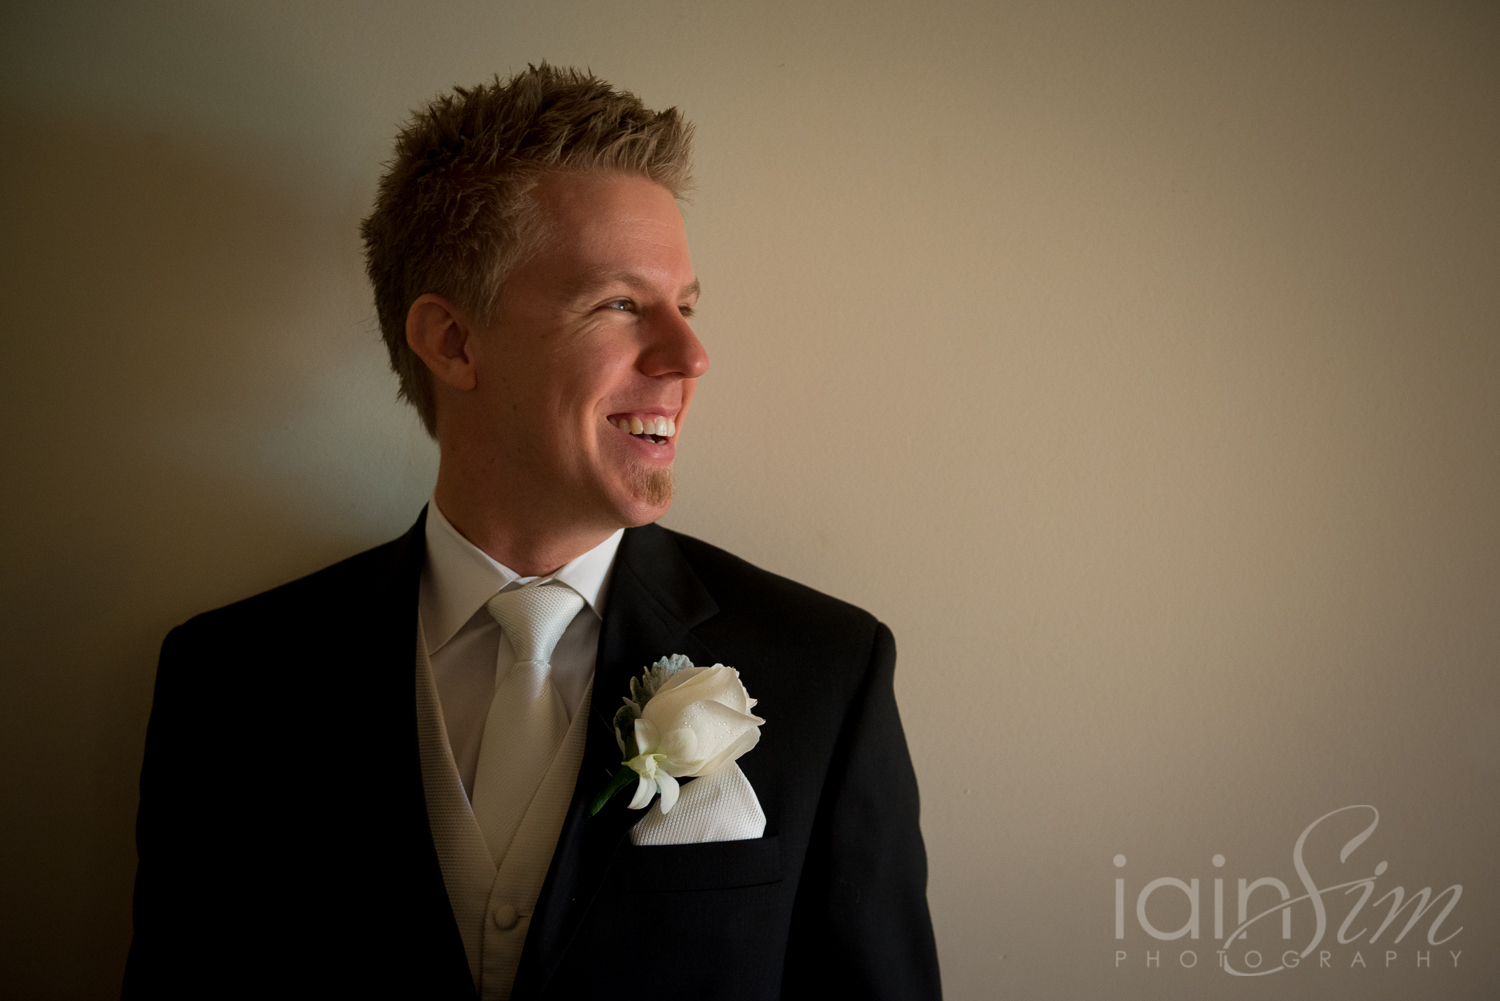 Dannii and James’ Wedding at Doyles Mordialloc